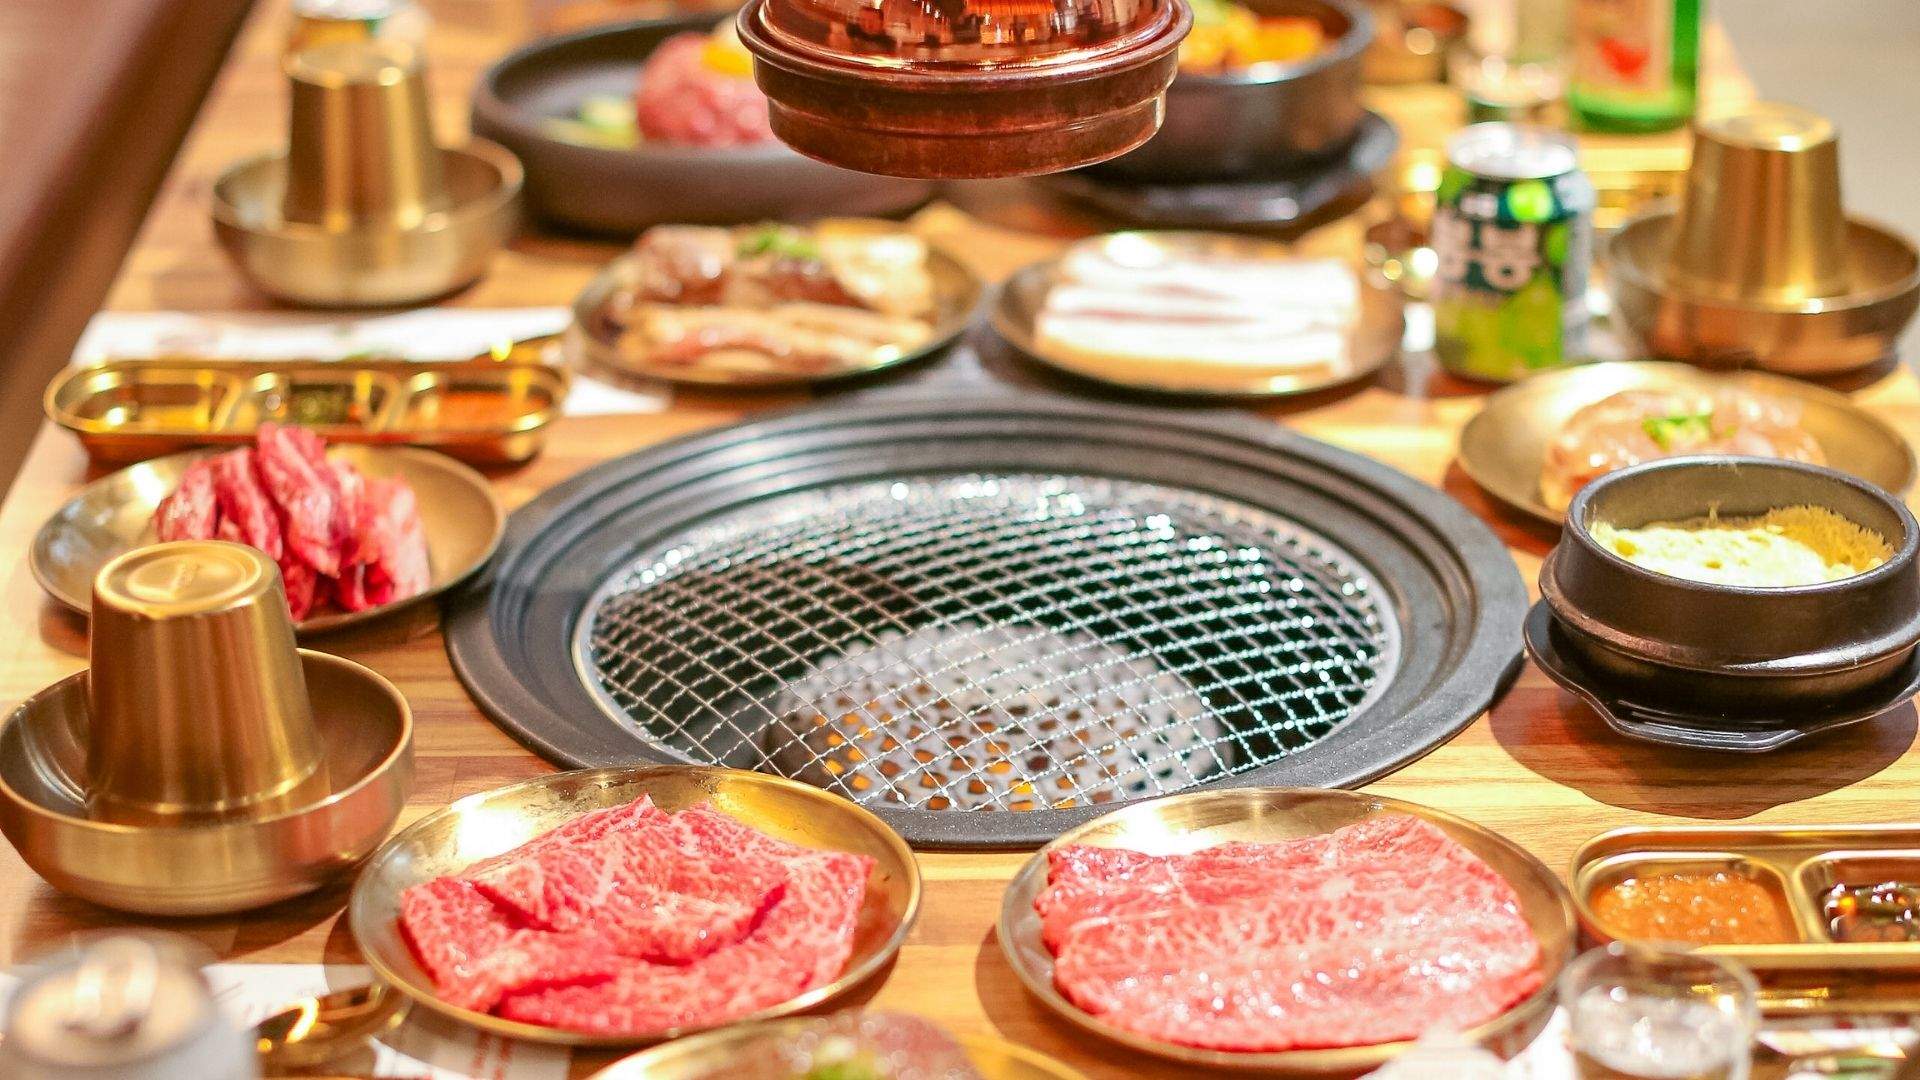 Premium cuts of meat from the menu of Darling Square's 789 Korean BBQ.